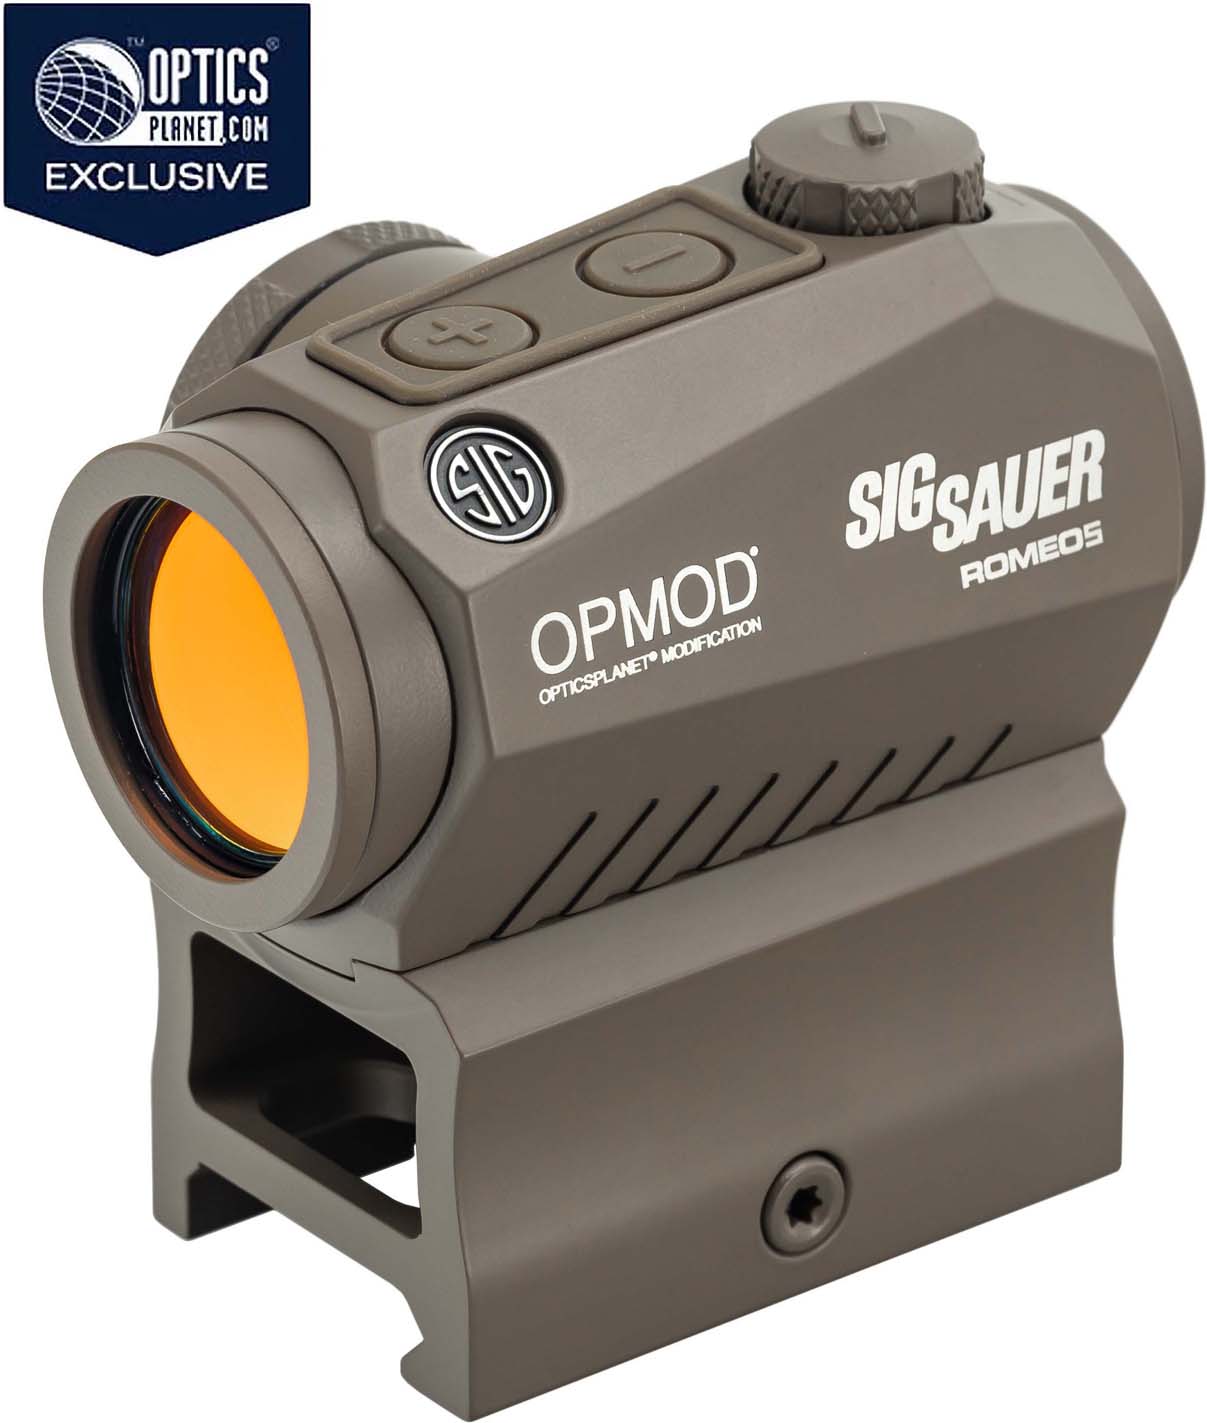 SIG SAUER OPMOD Romeo5 Compact 1x20mm Red Dot Sight | 38% Off 4.9 